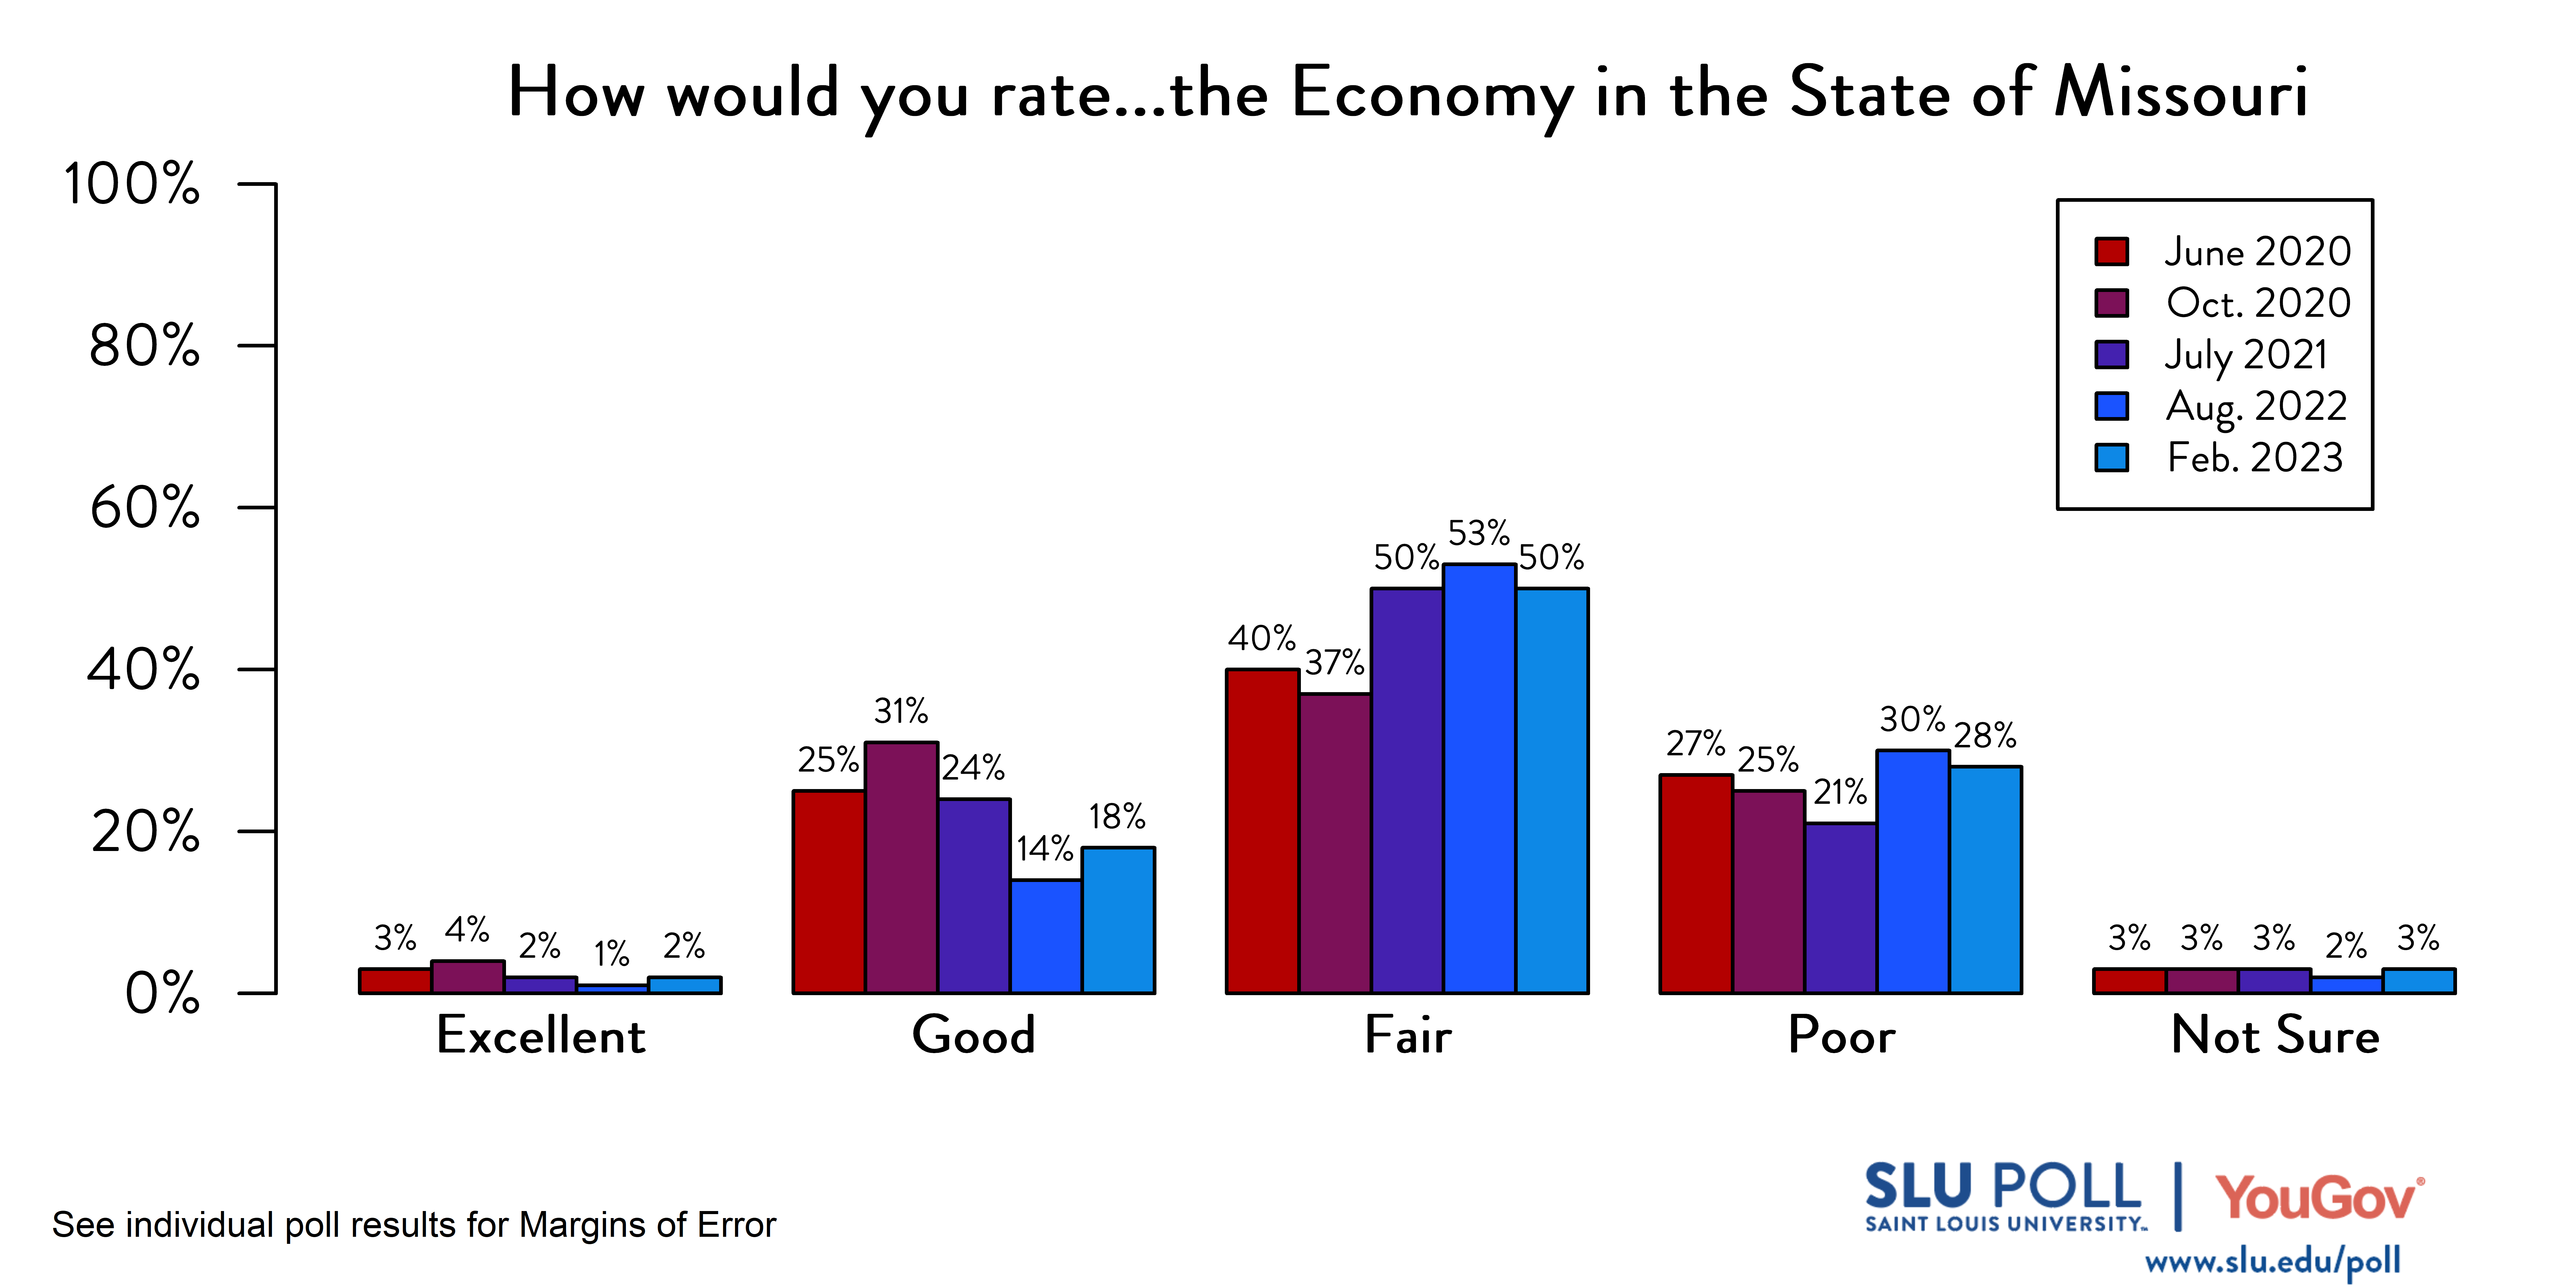 Likely voters' responses to 'How would you rate the condition of the following: The Economy in the State of Missouri?'. June 2020 Voter Responses 3% Excellent, 25% Good, 40% Fair, 27% Poor, and 3% Not Sure. October 2020 Voter Responses: 4% Excellent, 31% Good, 37% Fair, 25% Poor, and 3% Not sure. July 2021 Voter Responses: 2% Excellent, 24% Good, 50% Fair, 21% Poor, and 3% Not sure. August 2022 Voter Responses: 1% Excellent, 14% Good, 53% Fair, 30% Poor, and 2% Not sure. February 2023 Voter Responses: 2% Excellent, 18% Good, 50% Fair, 28% Poor, and 3% Not sure.